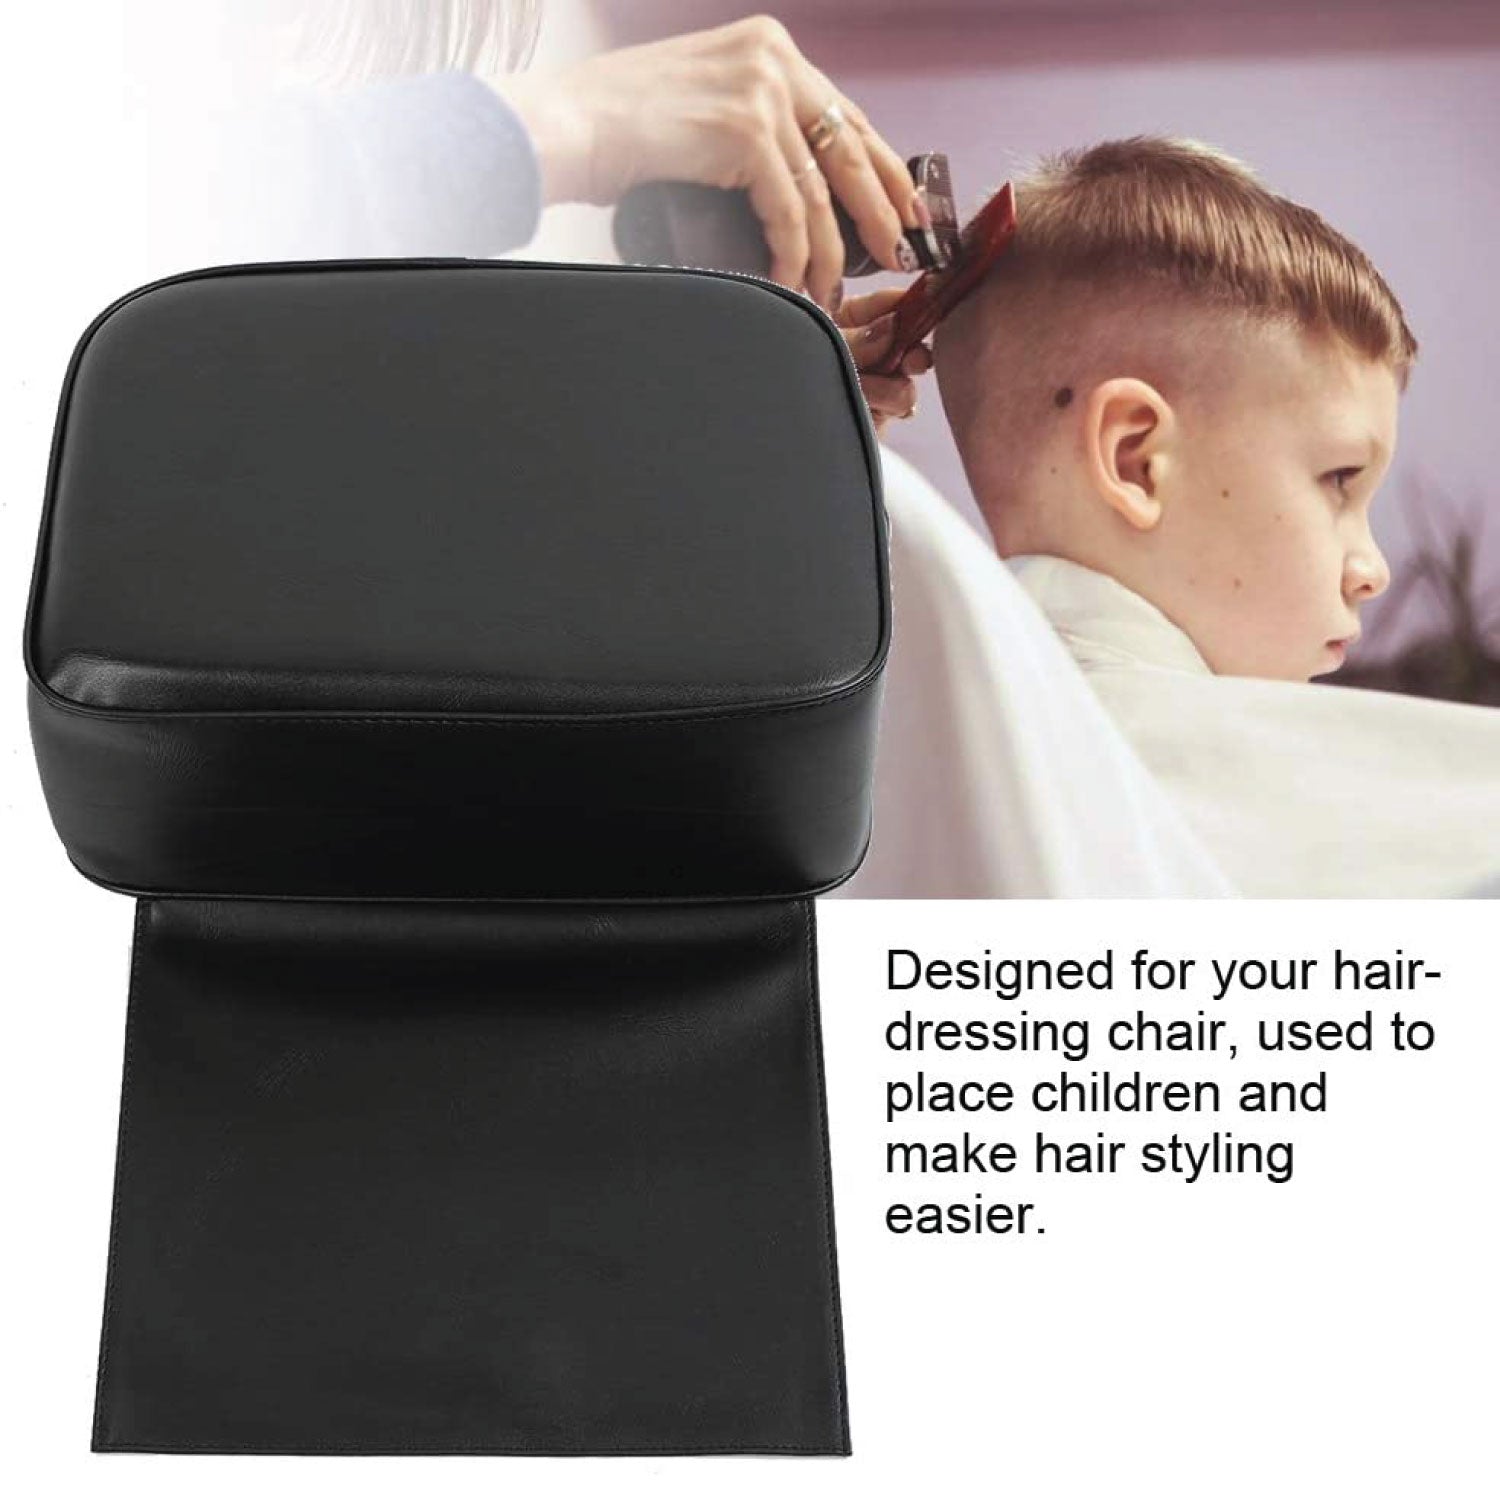 Barber Booster Seat - Salon Child Cushion, Hair Salon Barber Chair Child Booster Seat Cushion, Hair Cutting Styling Beauty SPA Equipment